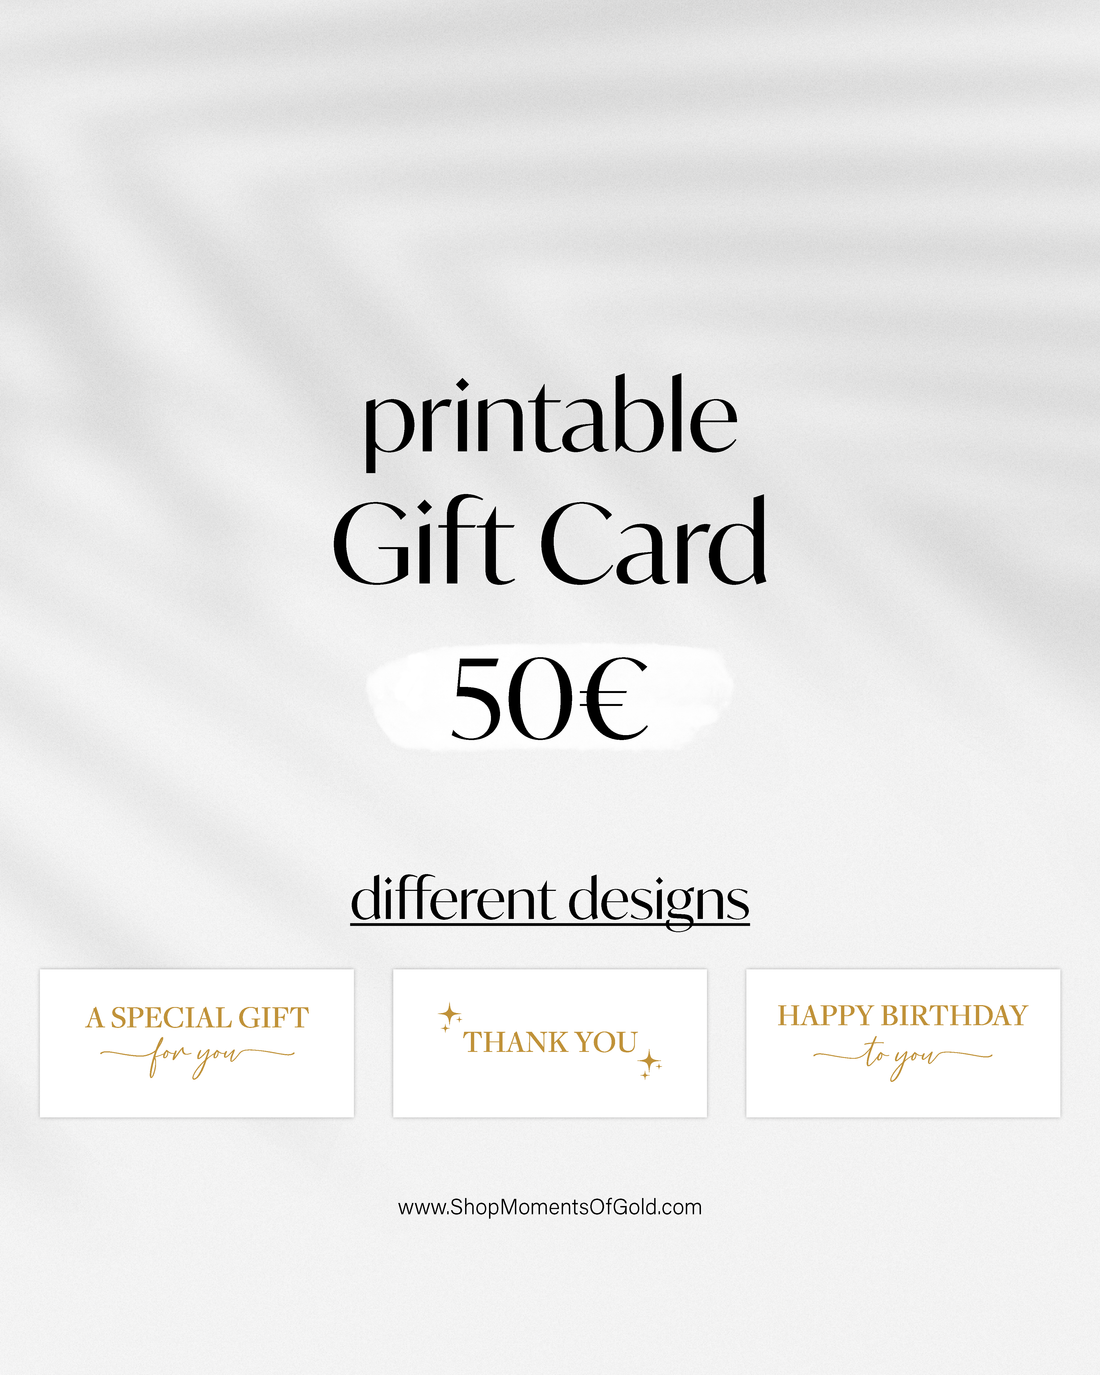 printable 50€ gift card with different designs